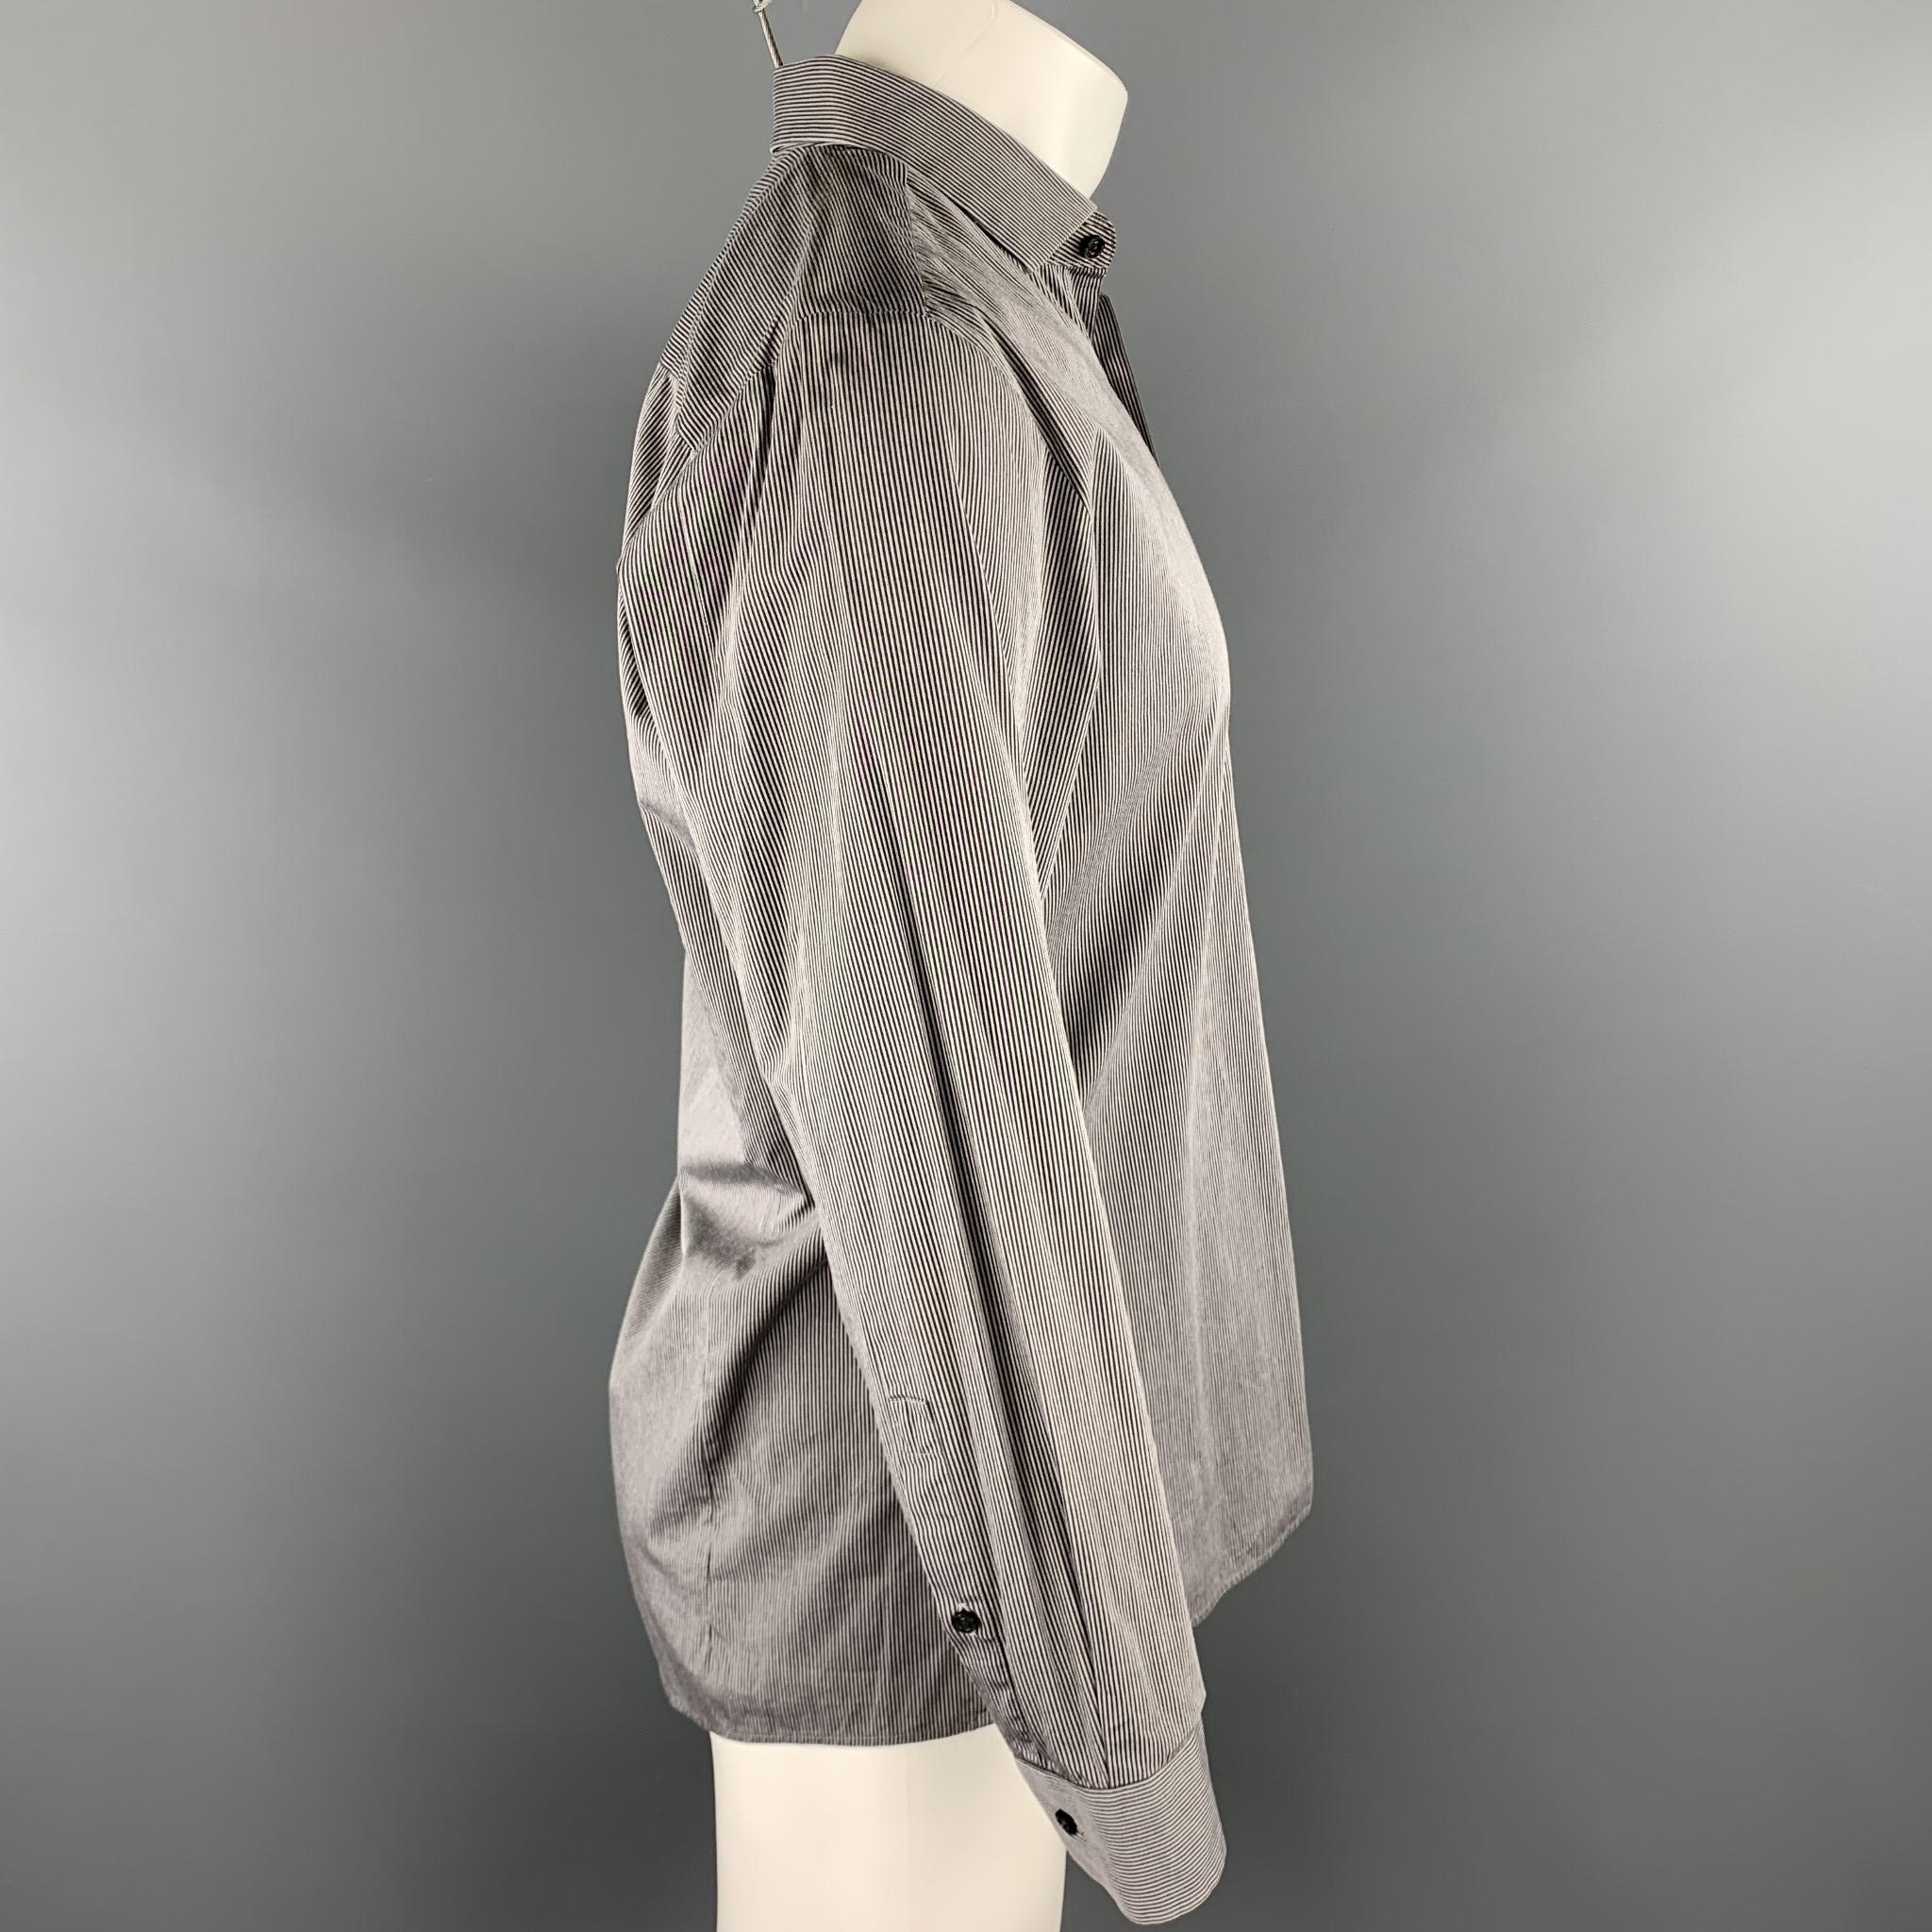 HUGO BOSS long sleeve shirt comes in a gray stripe cotton blend featuring a button up style and a spread collar.

Very Good Pre-Owned Condition.
Marked: 15.5/32

Measurements:

Shoulder: 17.5 in. 
Chest: 40 in. 
Sleeve: 24 in. 
Length: 29 in. 
SKU: